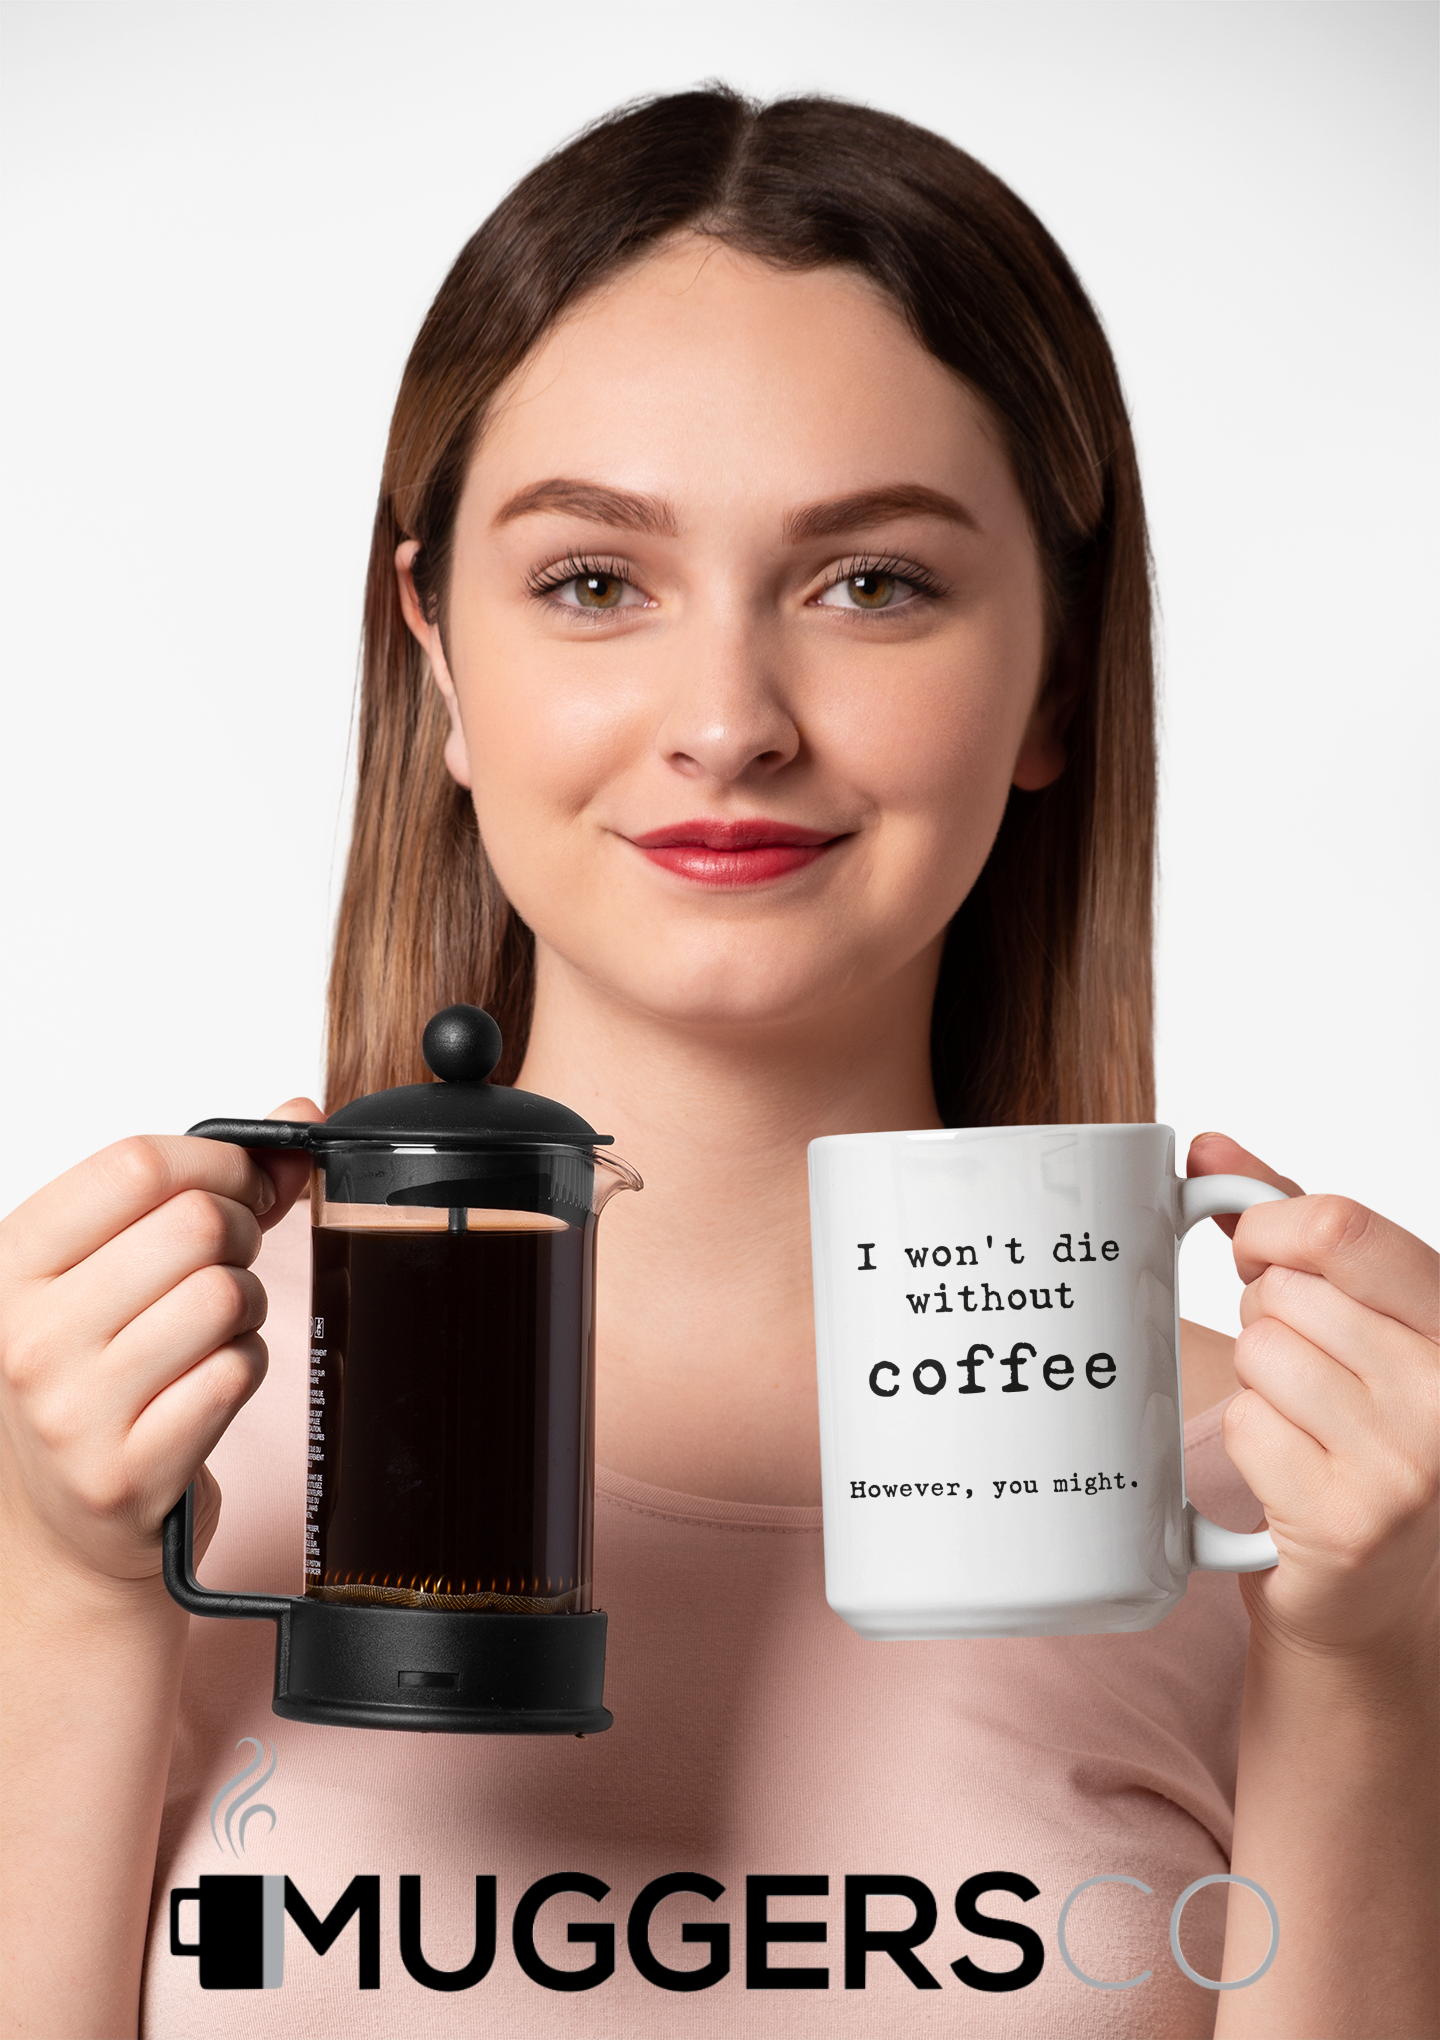 Woman holding coffee mug and coffee press I won't die without coffee but you might